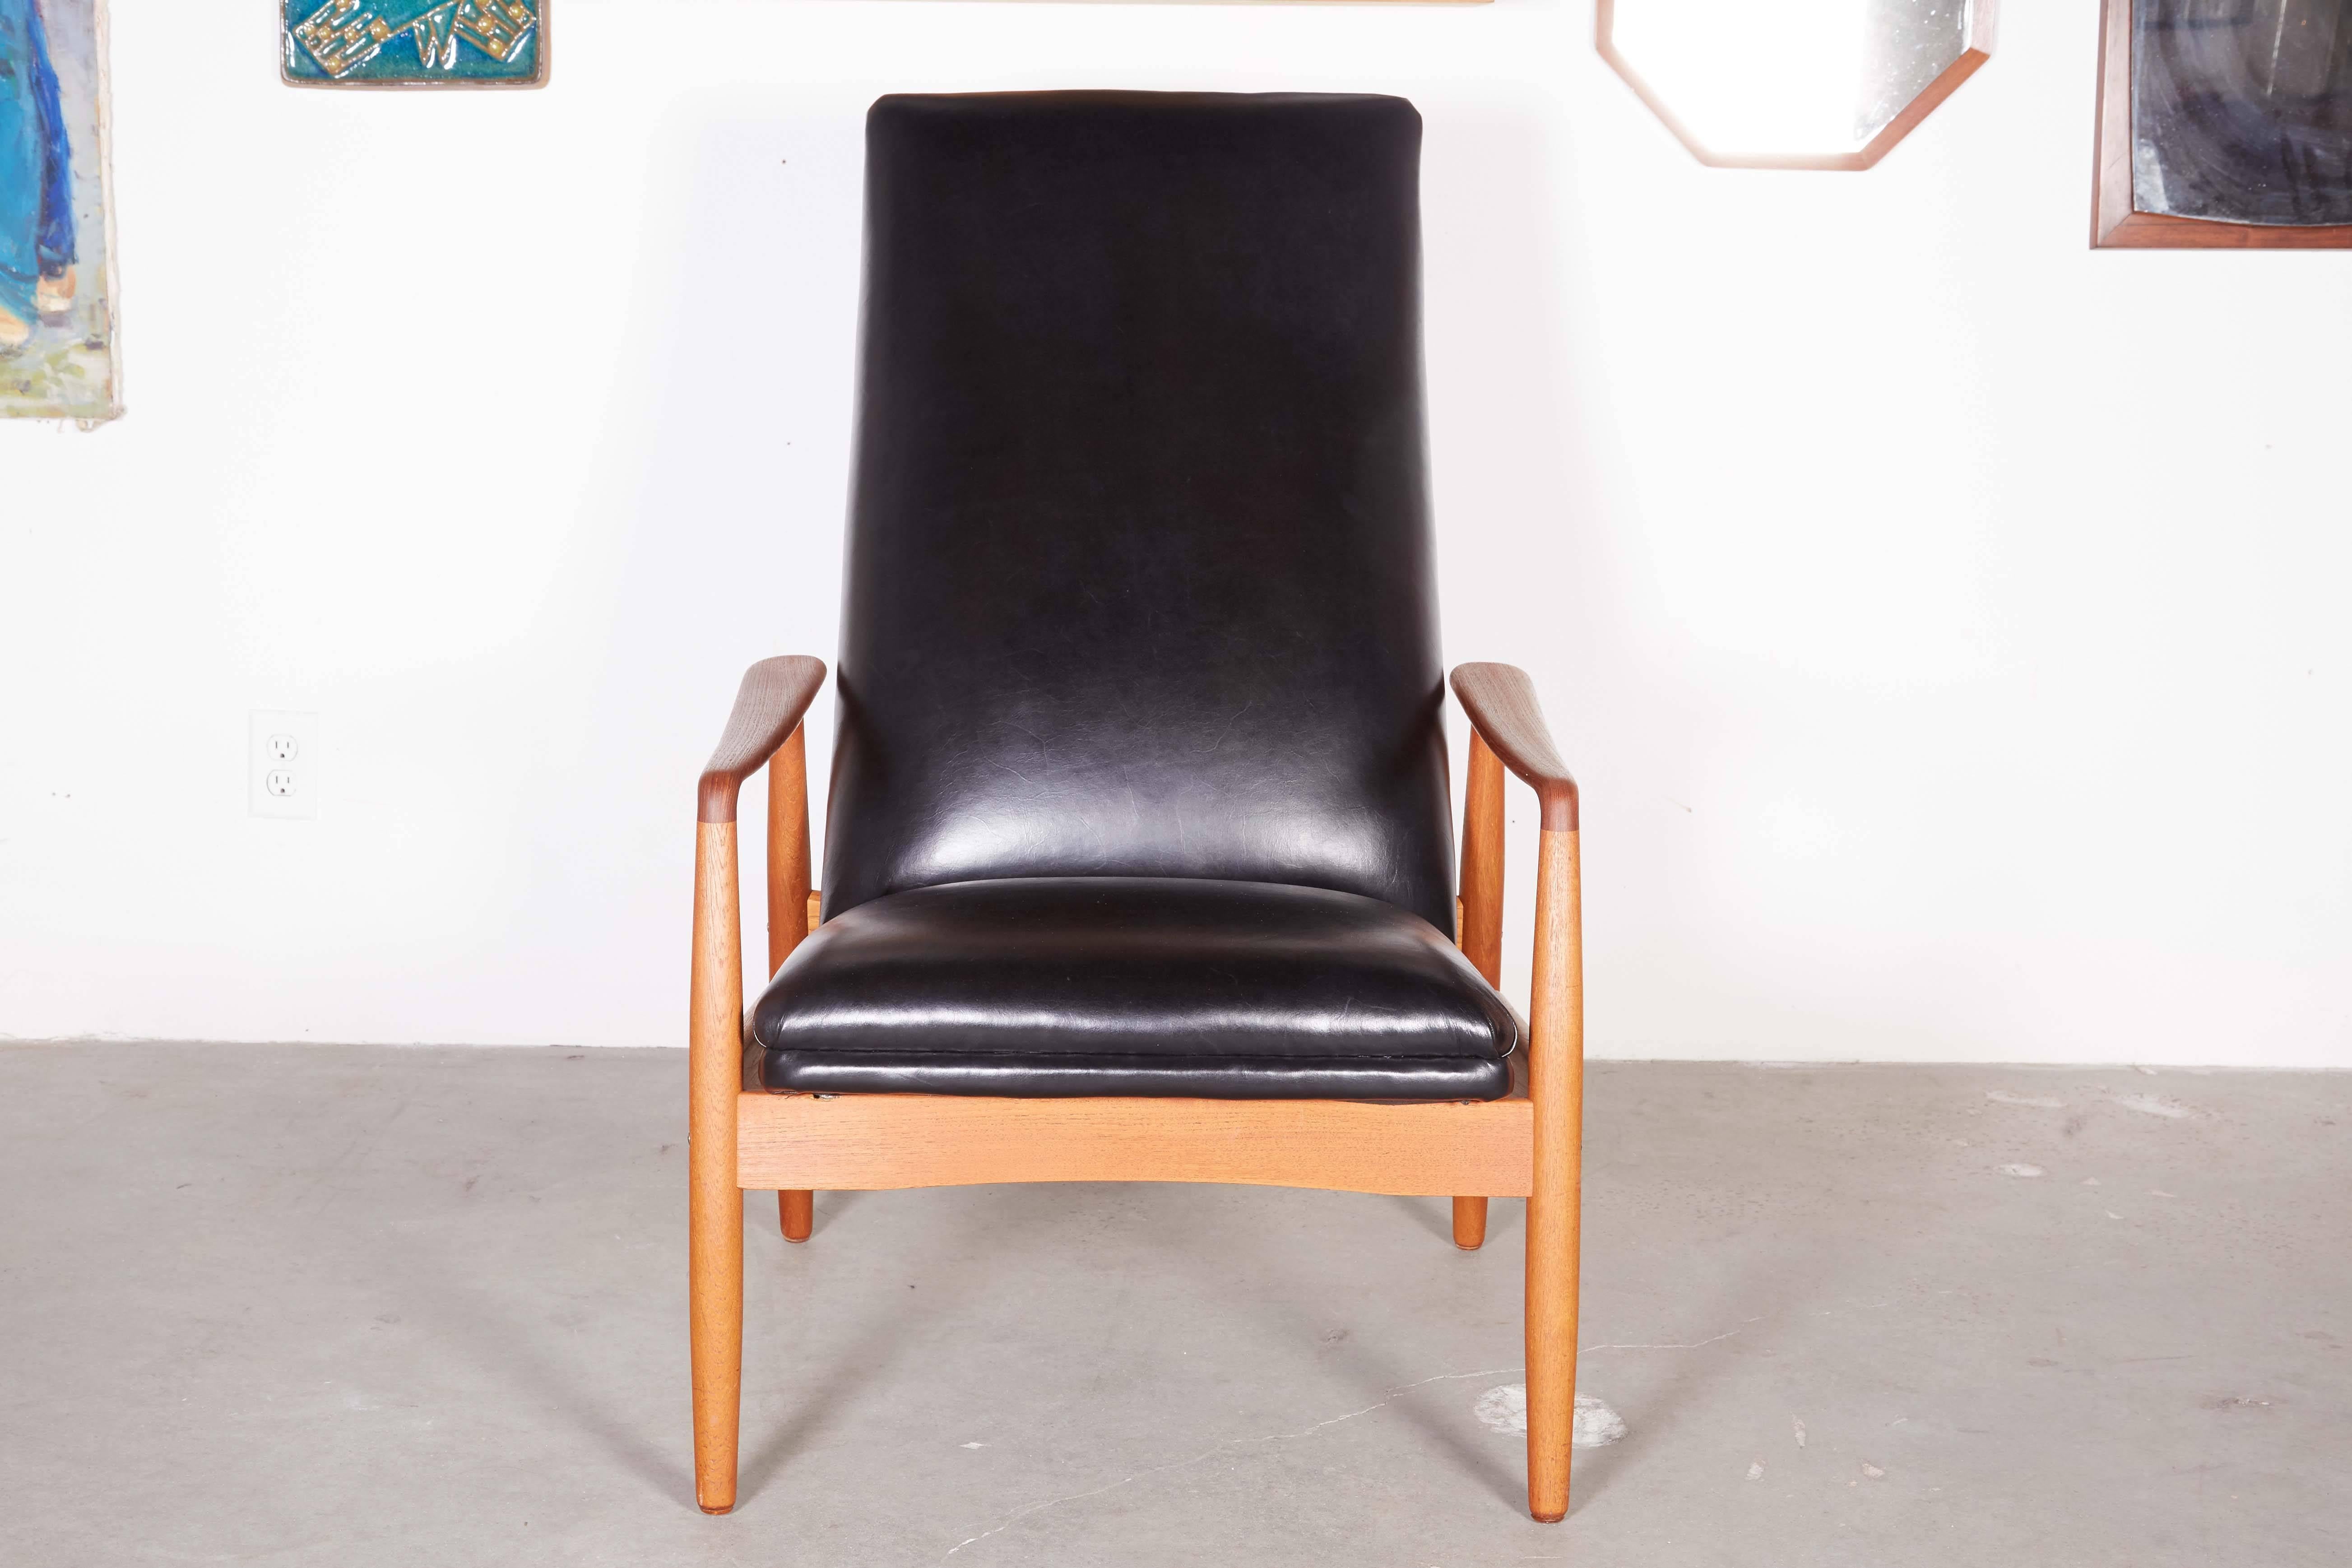 Vintage 1950s Teak Recliner Arm Chair

This Danish leather recliner is in excellent condition, and newly upholstered in a lovely satin black Italian leather. Simple reclining mechanism that never fails. Amazingly comfy. Ready for pick up,  